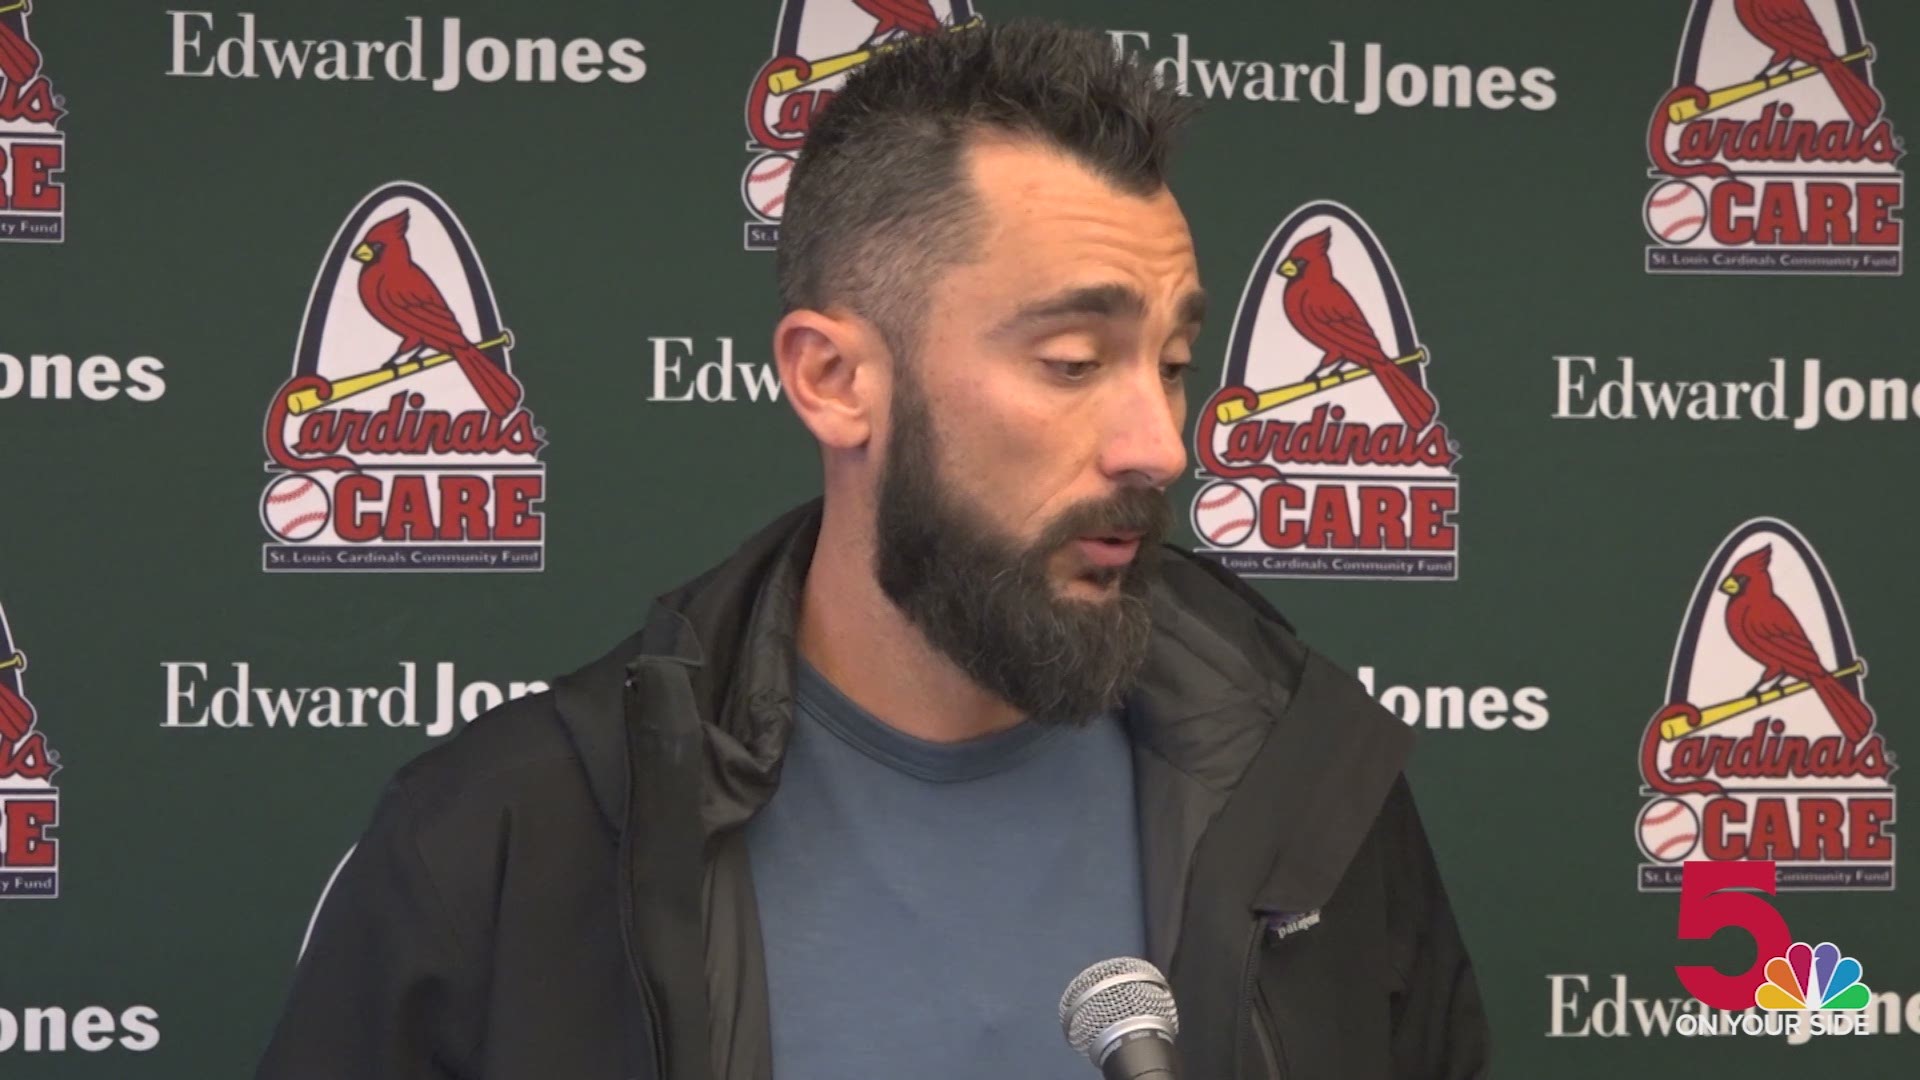 Matt Carpenter had a career-worst year in 2019. His motivation to prove himself in 2020 is his driving force.